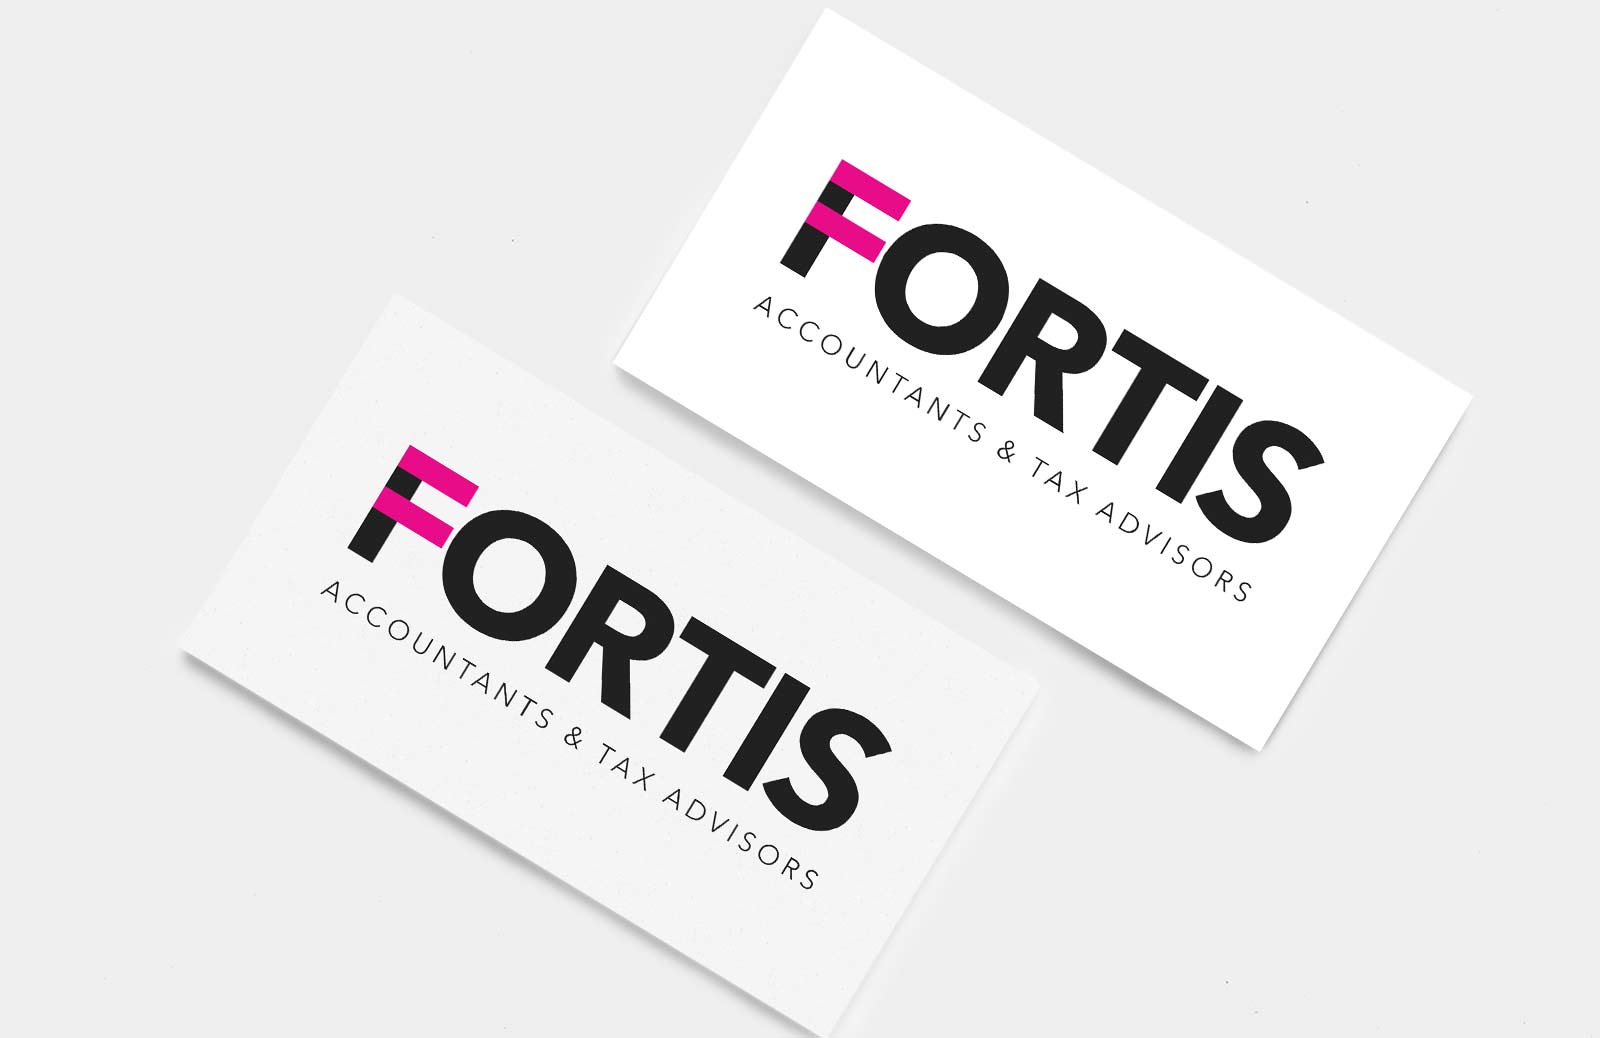 Fortis Accountancy business card design